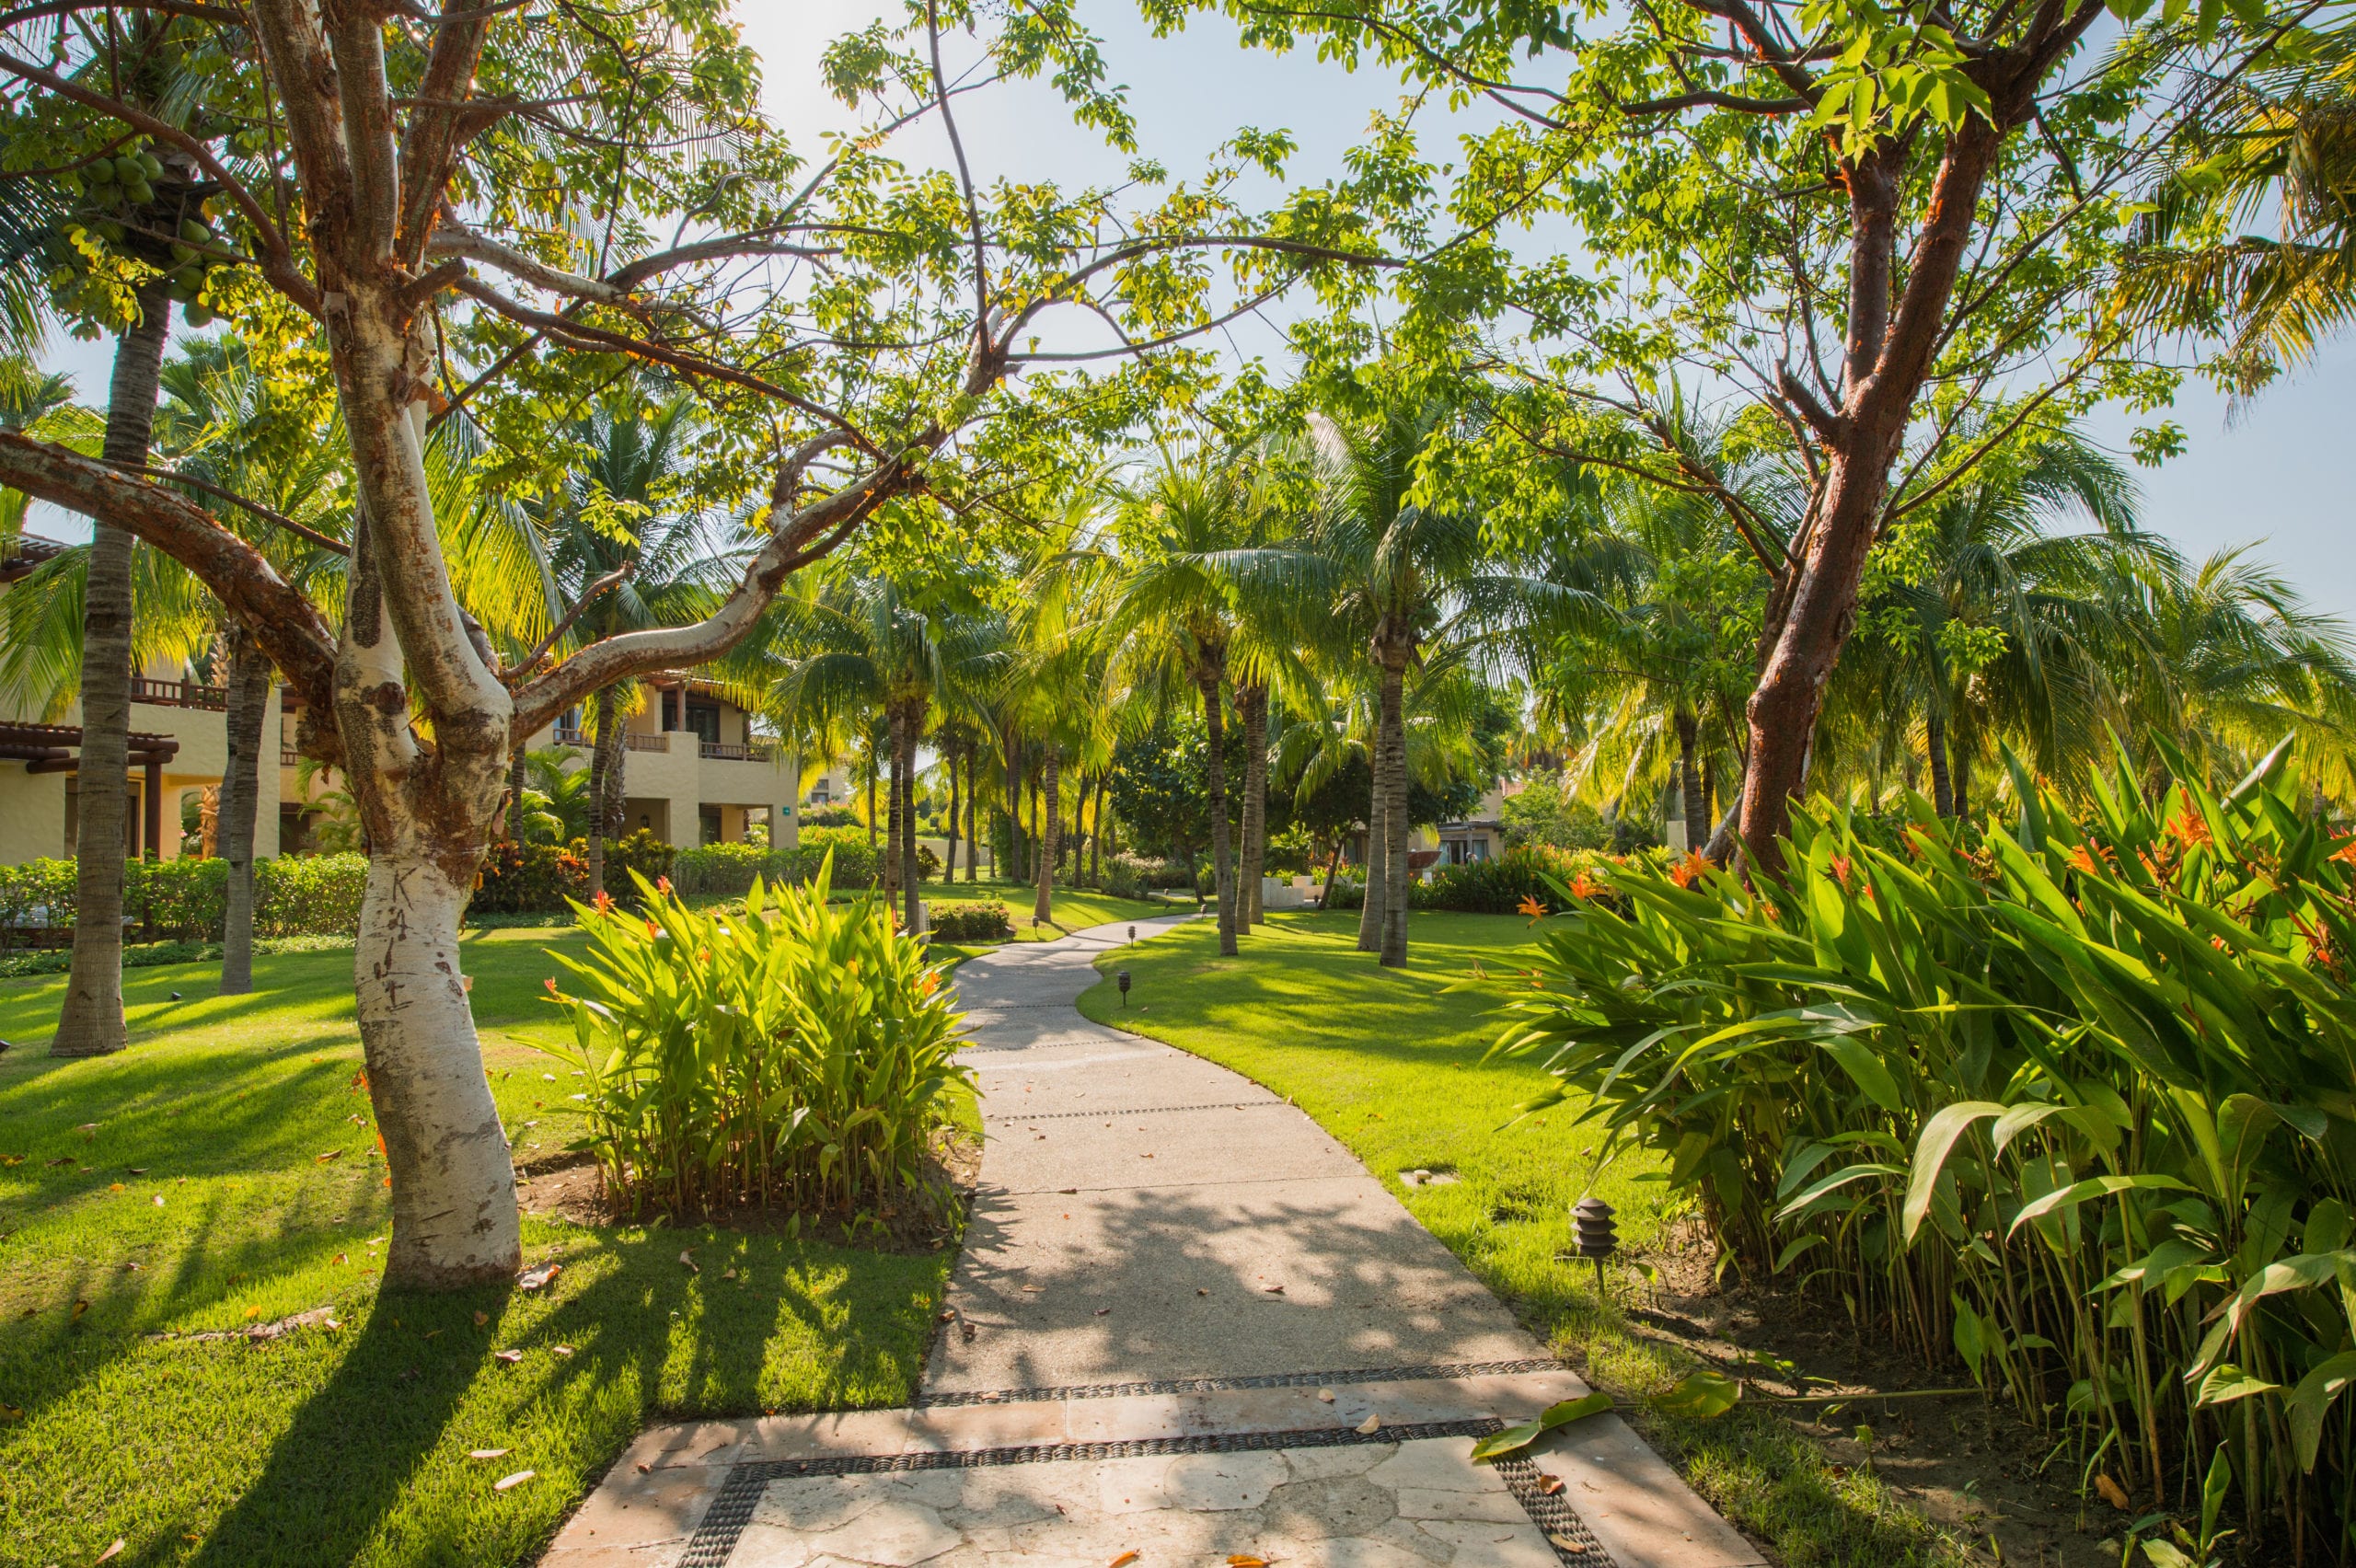 St Regis Walkway with green foliage, trees and palm trees